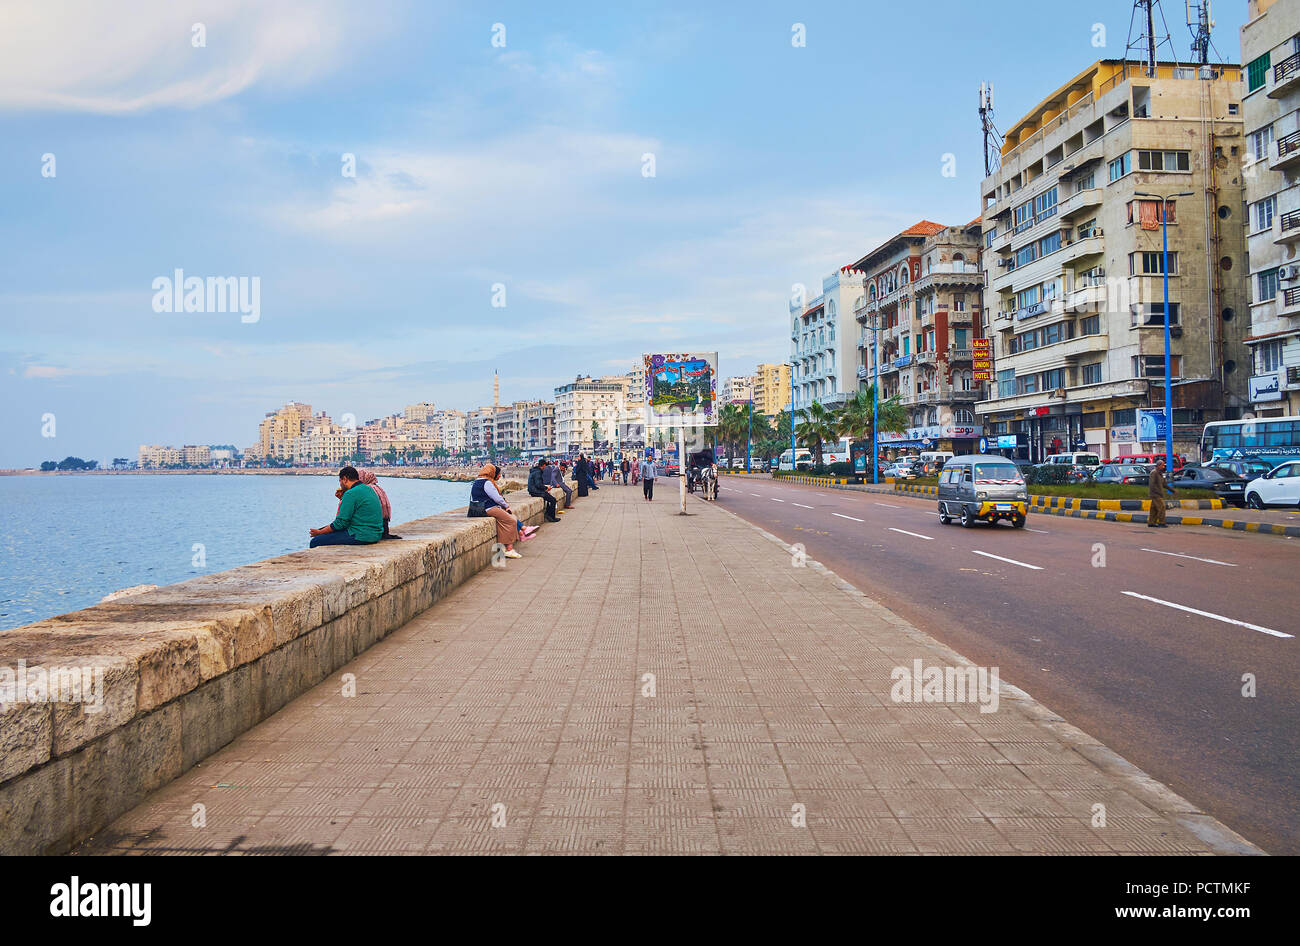 ALEXANDRIA, EGYPT - DECEMBER 18, 2017: The lazy walk in 26 of July Road (Corniche) - the central city street, stretching along the coast and famous as Stock Photo